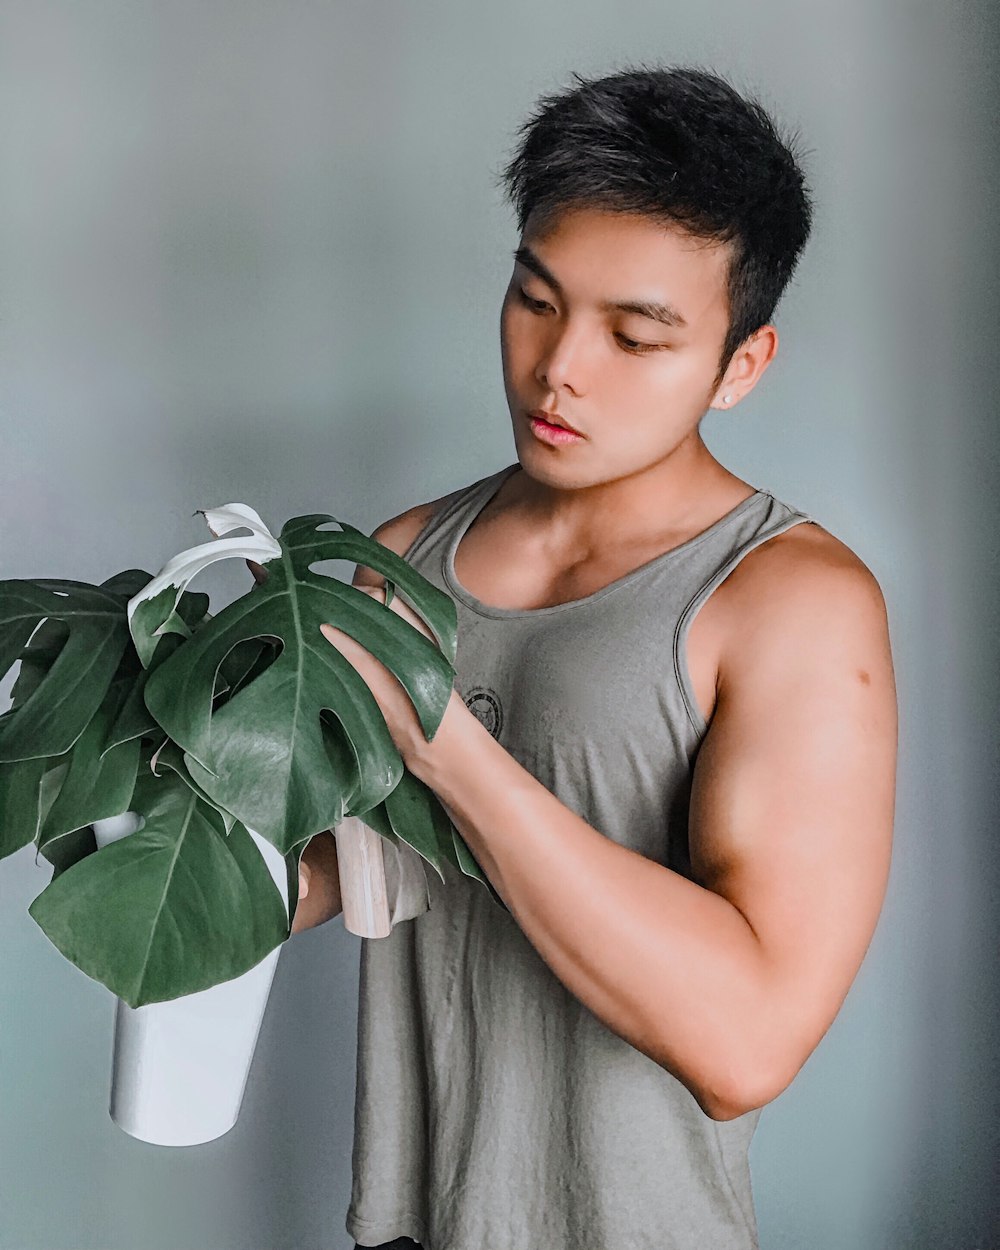 woman in gray tank top holding green plant